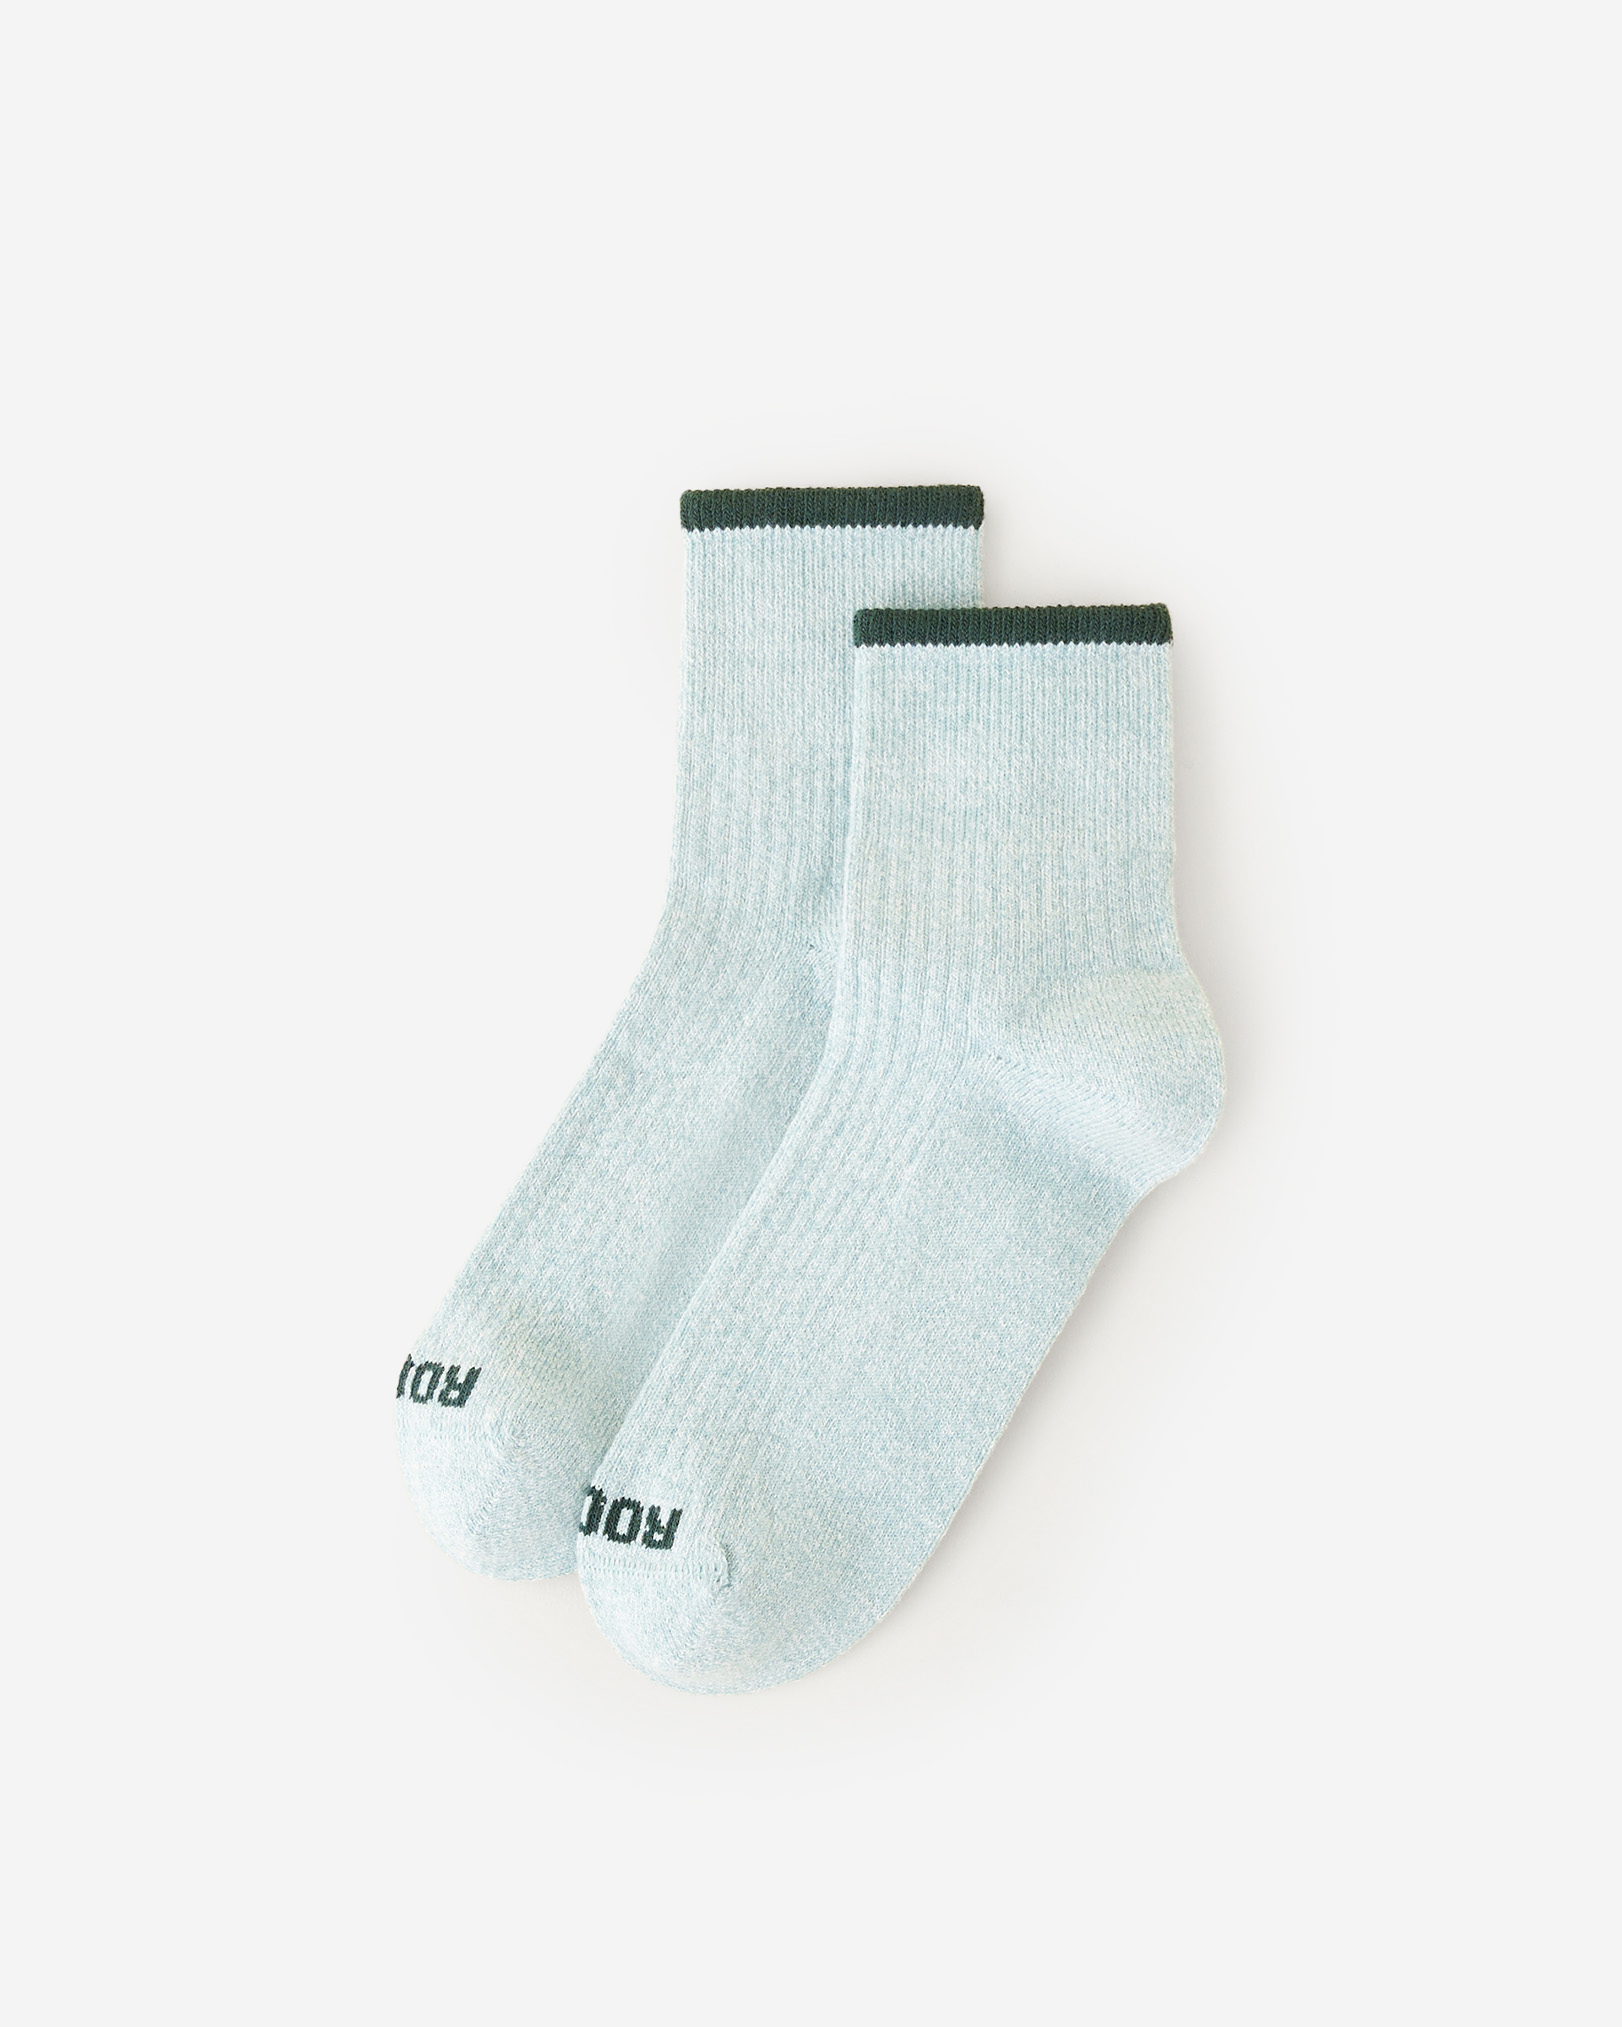 Roots Women's Cotton Ankle Sock in Aqua Grey Mix